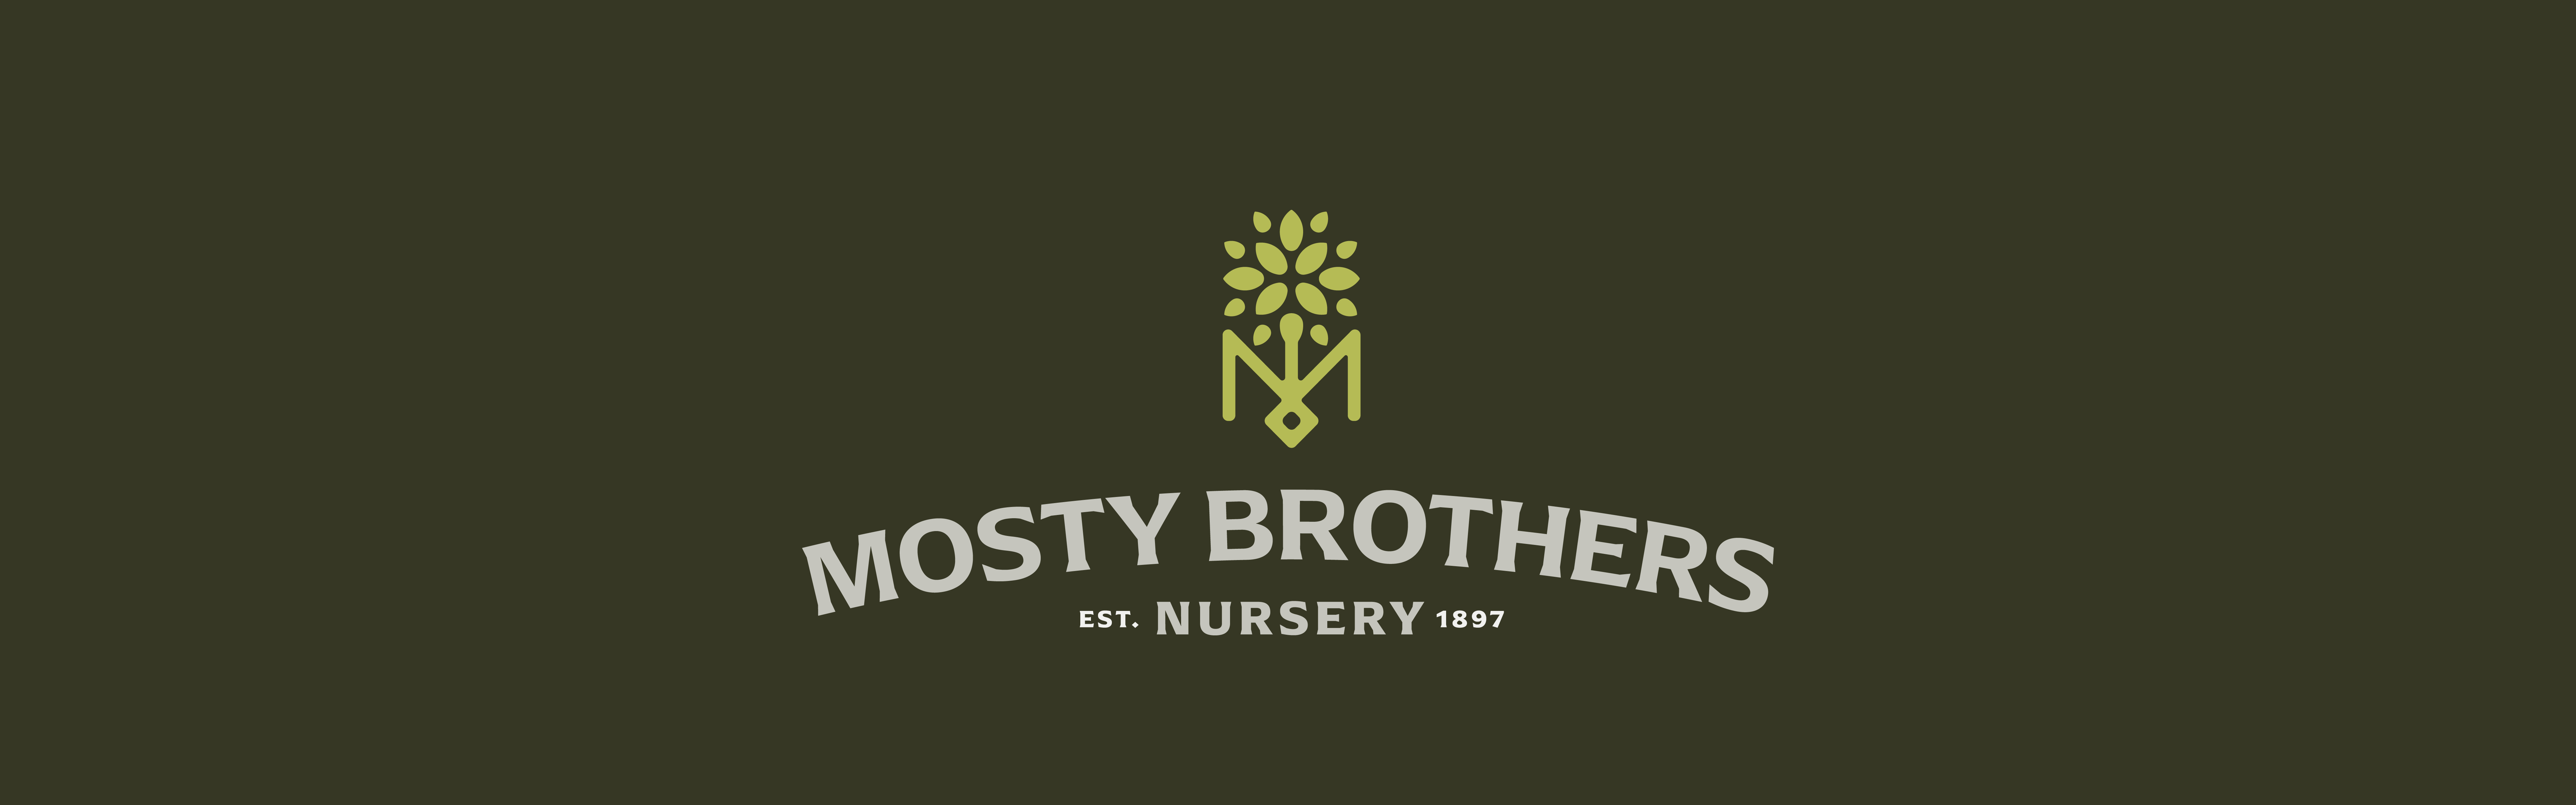 Logo of "Mosty Brothers Nursery" with an establishment year of 1897, featuring a stylized flower graphic above the text, set against an olive green background.